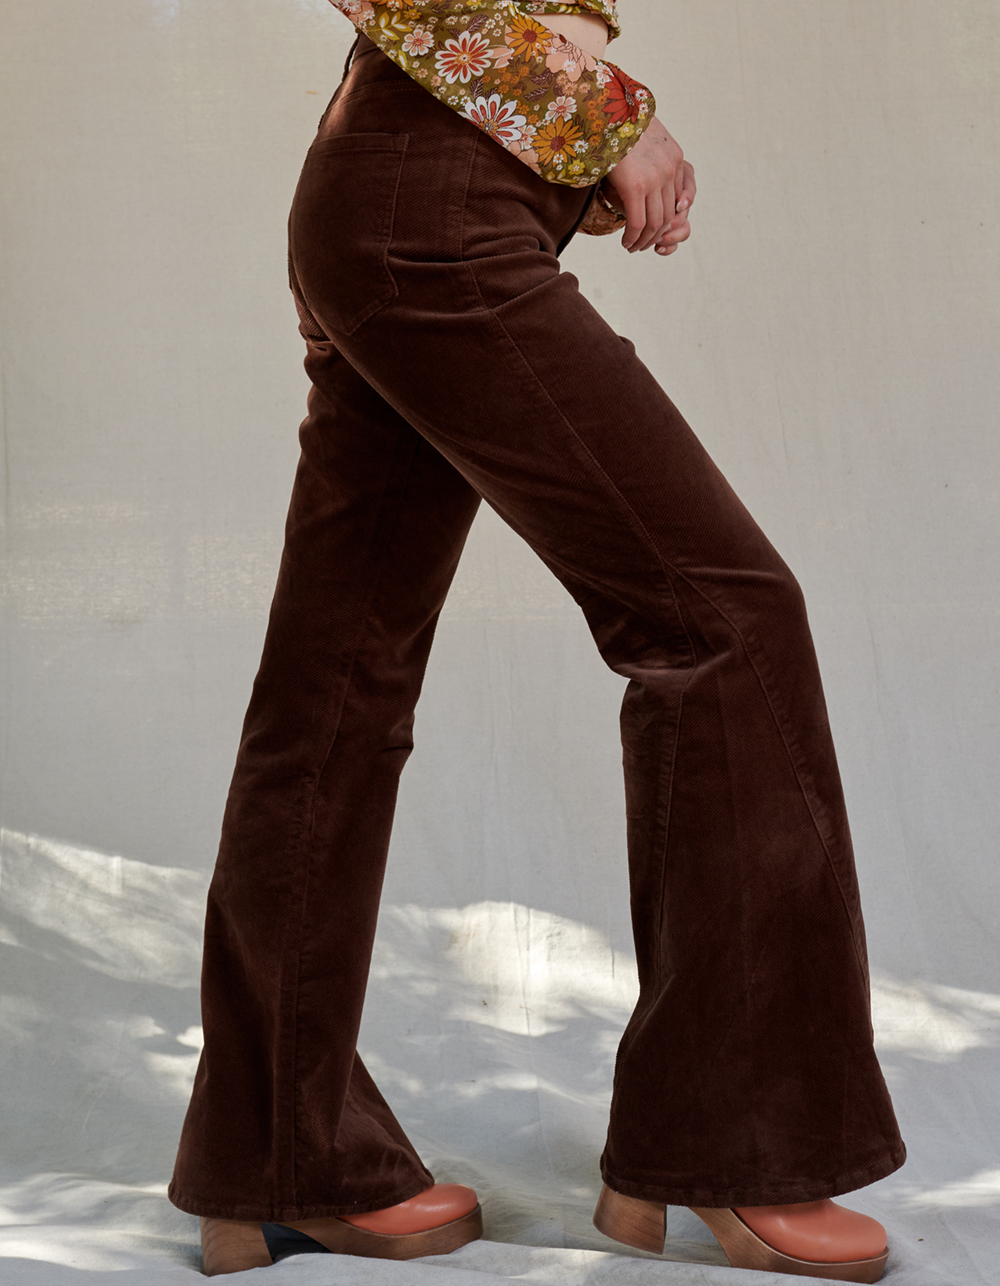 WEST OF MELROSE Womens Corduroy Flare Pants